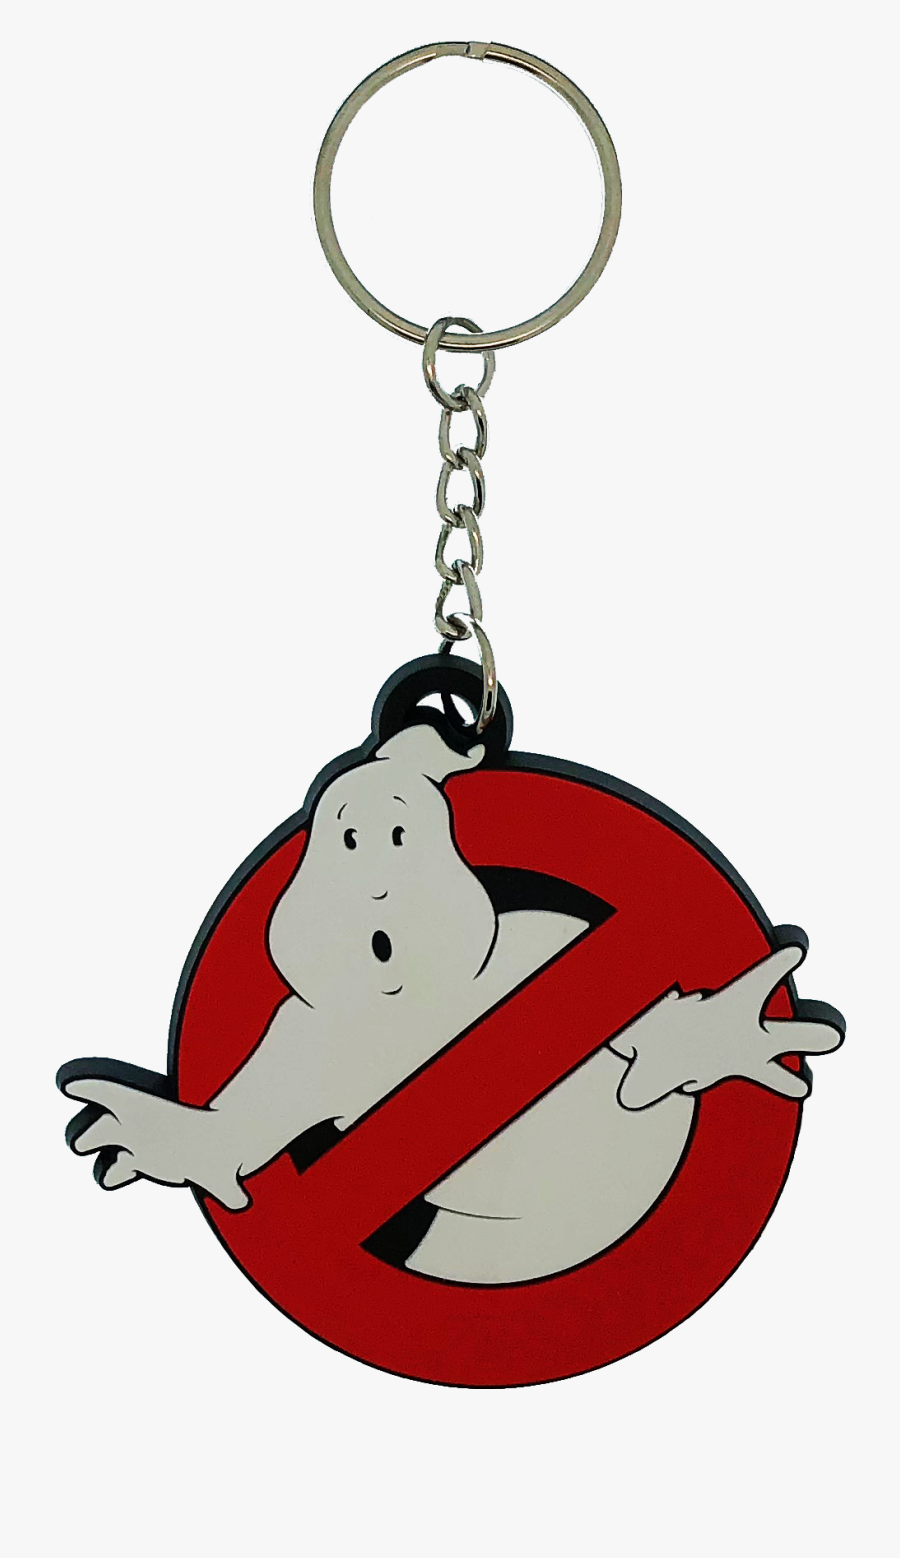 Ghostbusters Rubber Key Chain - Transparent Ghostbusters Logo Gif, Transparent Clipart